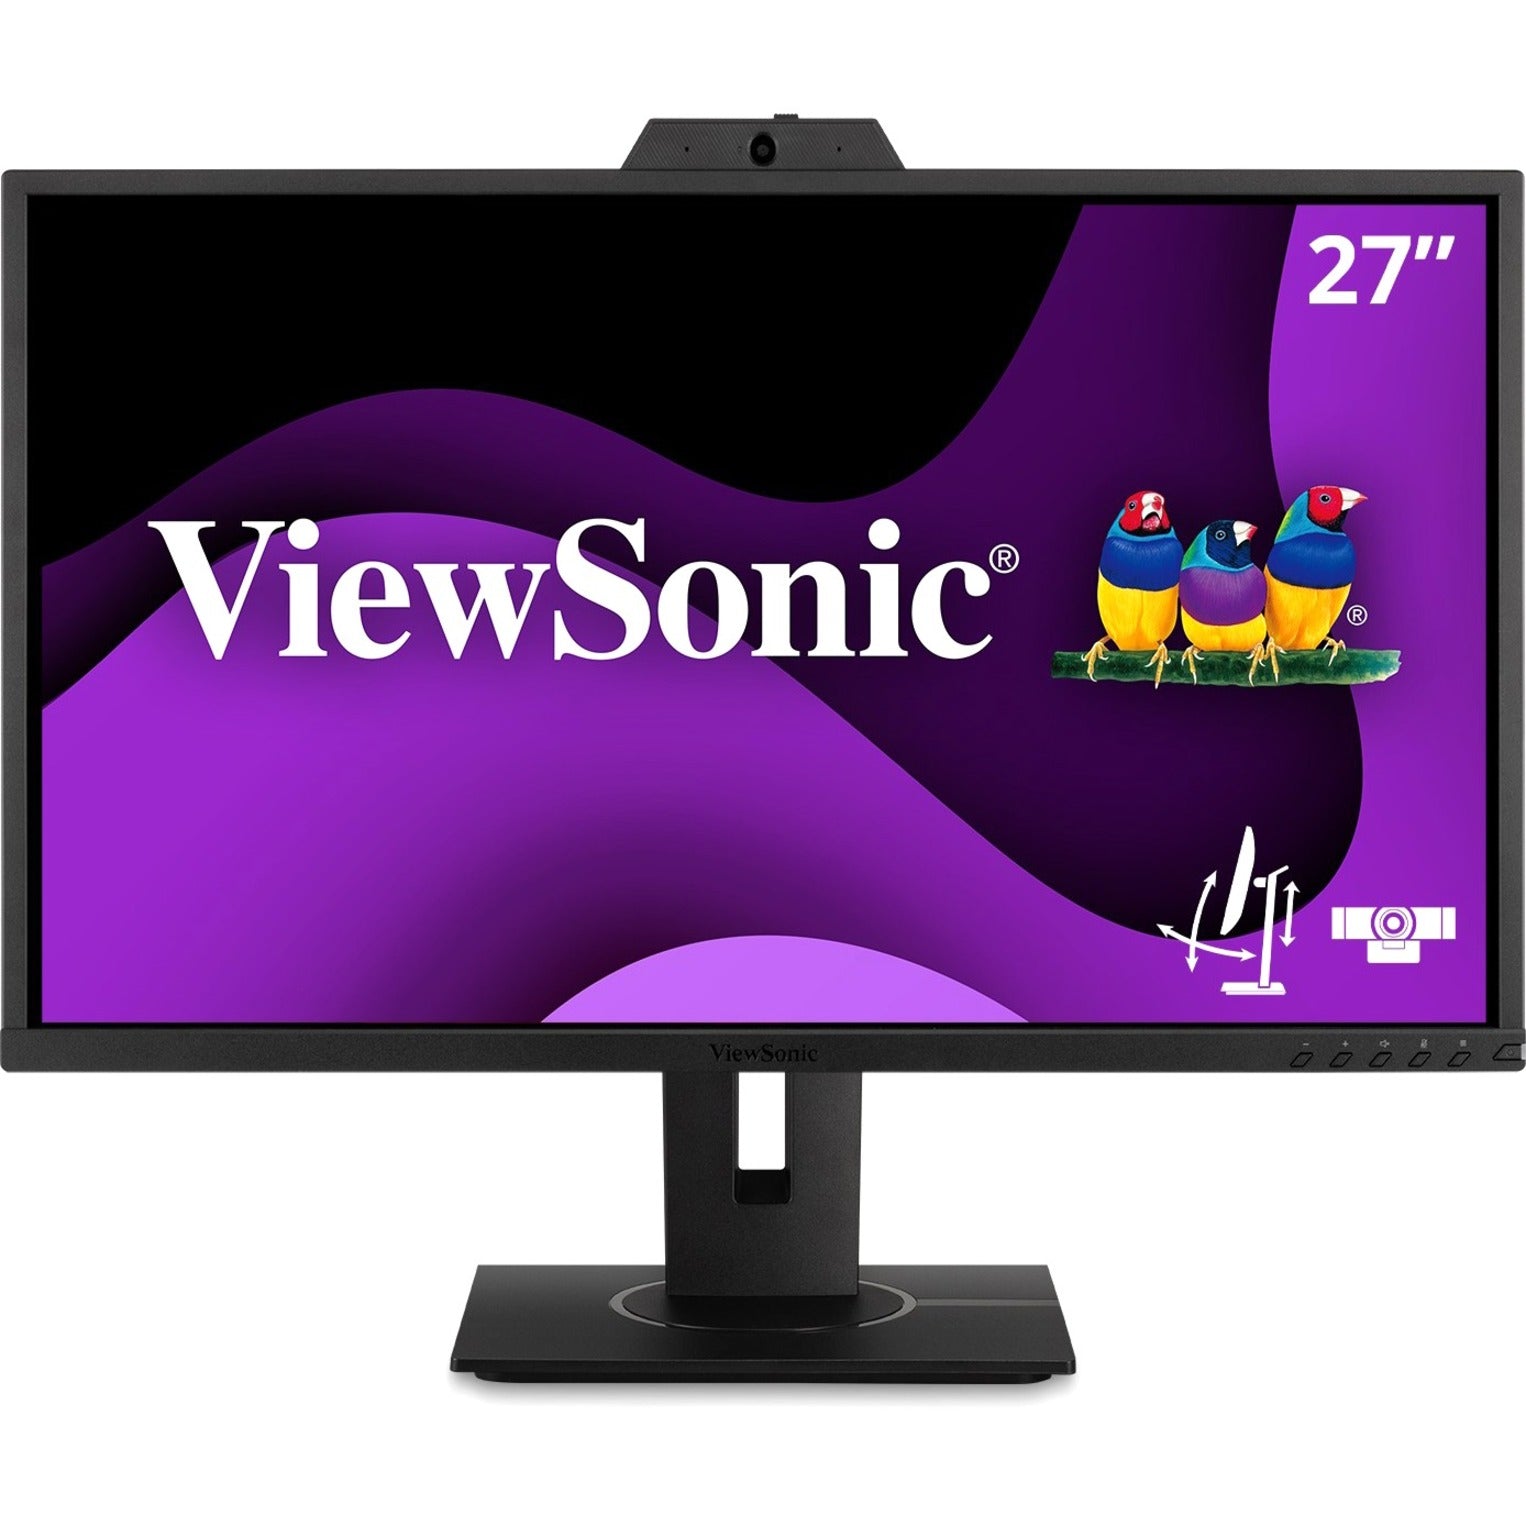 ViewSonic VG2740V 27 IPS Full HD Video Conferencing Monitor, SuperClear IPS, Built-in Webcam, Microphone, USB Hub, HDMI, DisplayPort